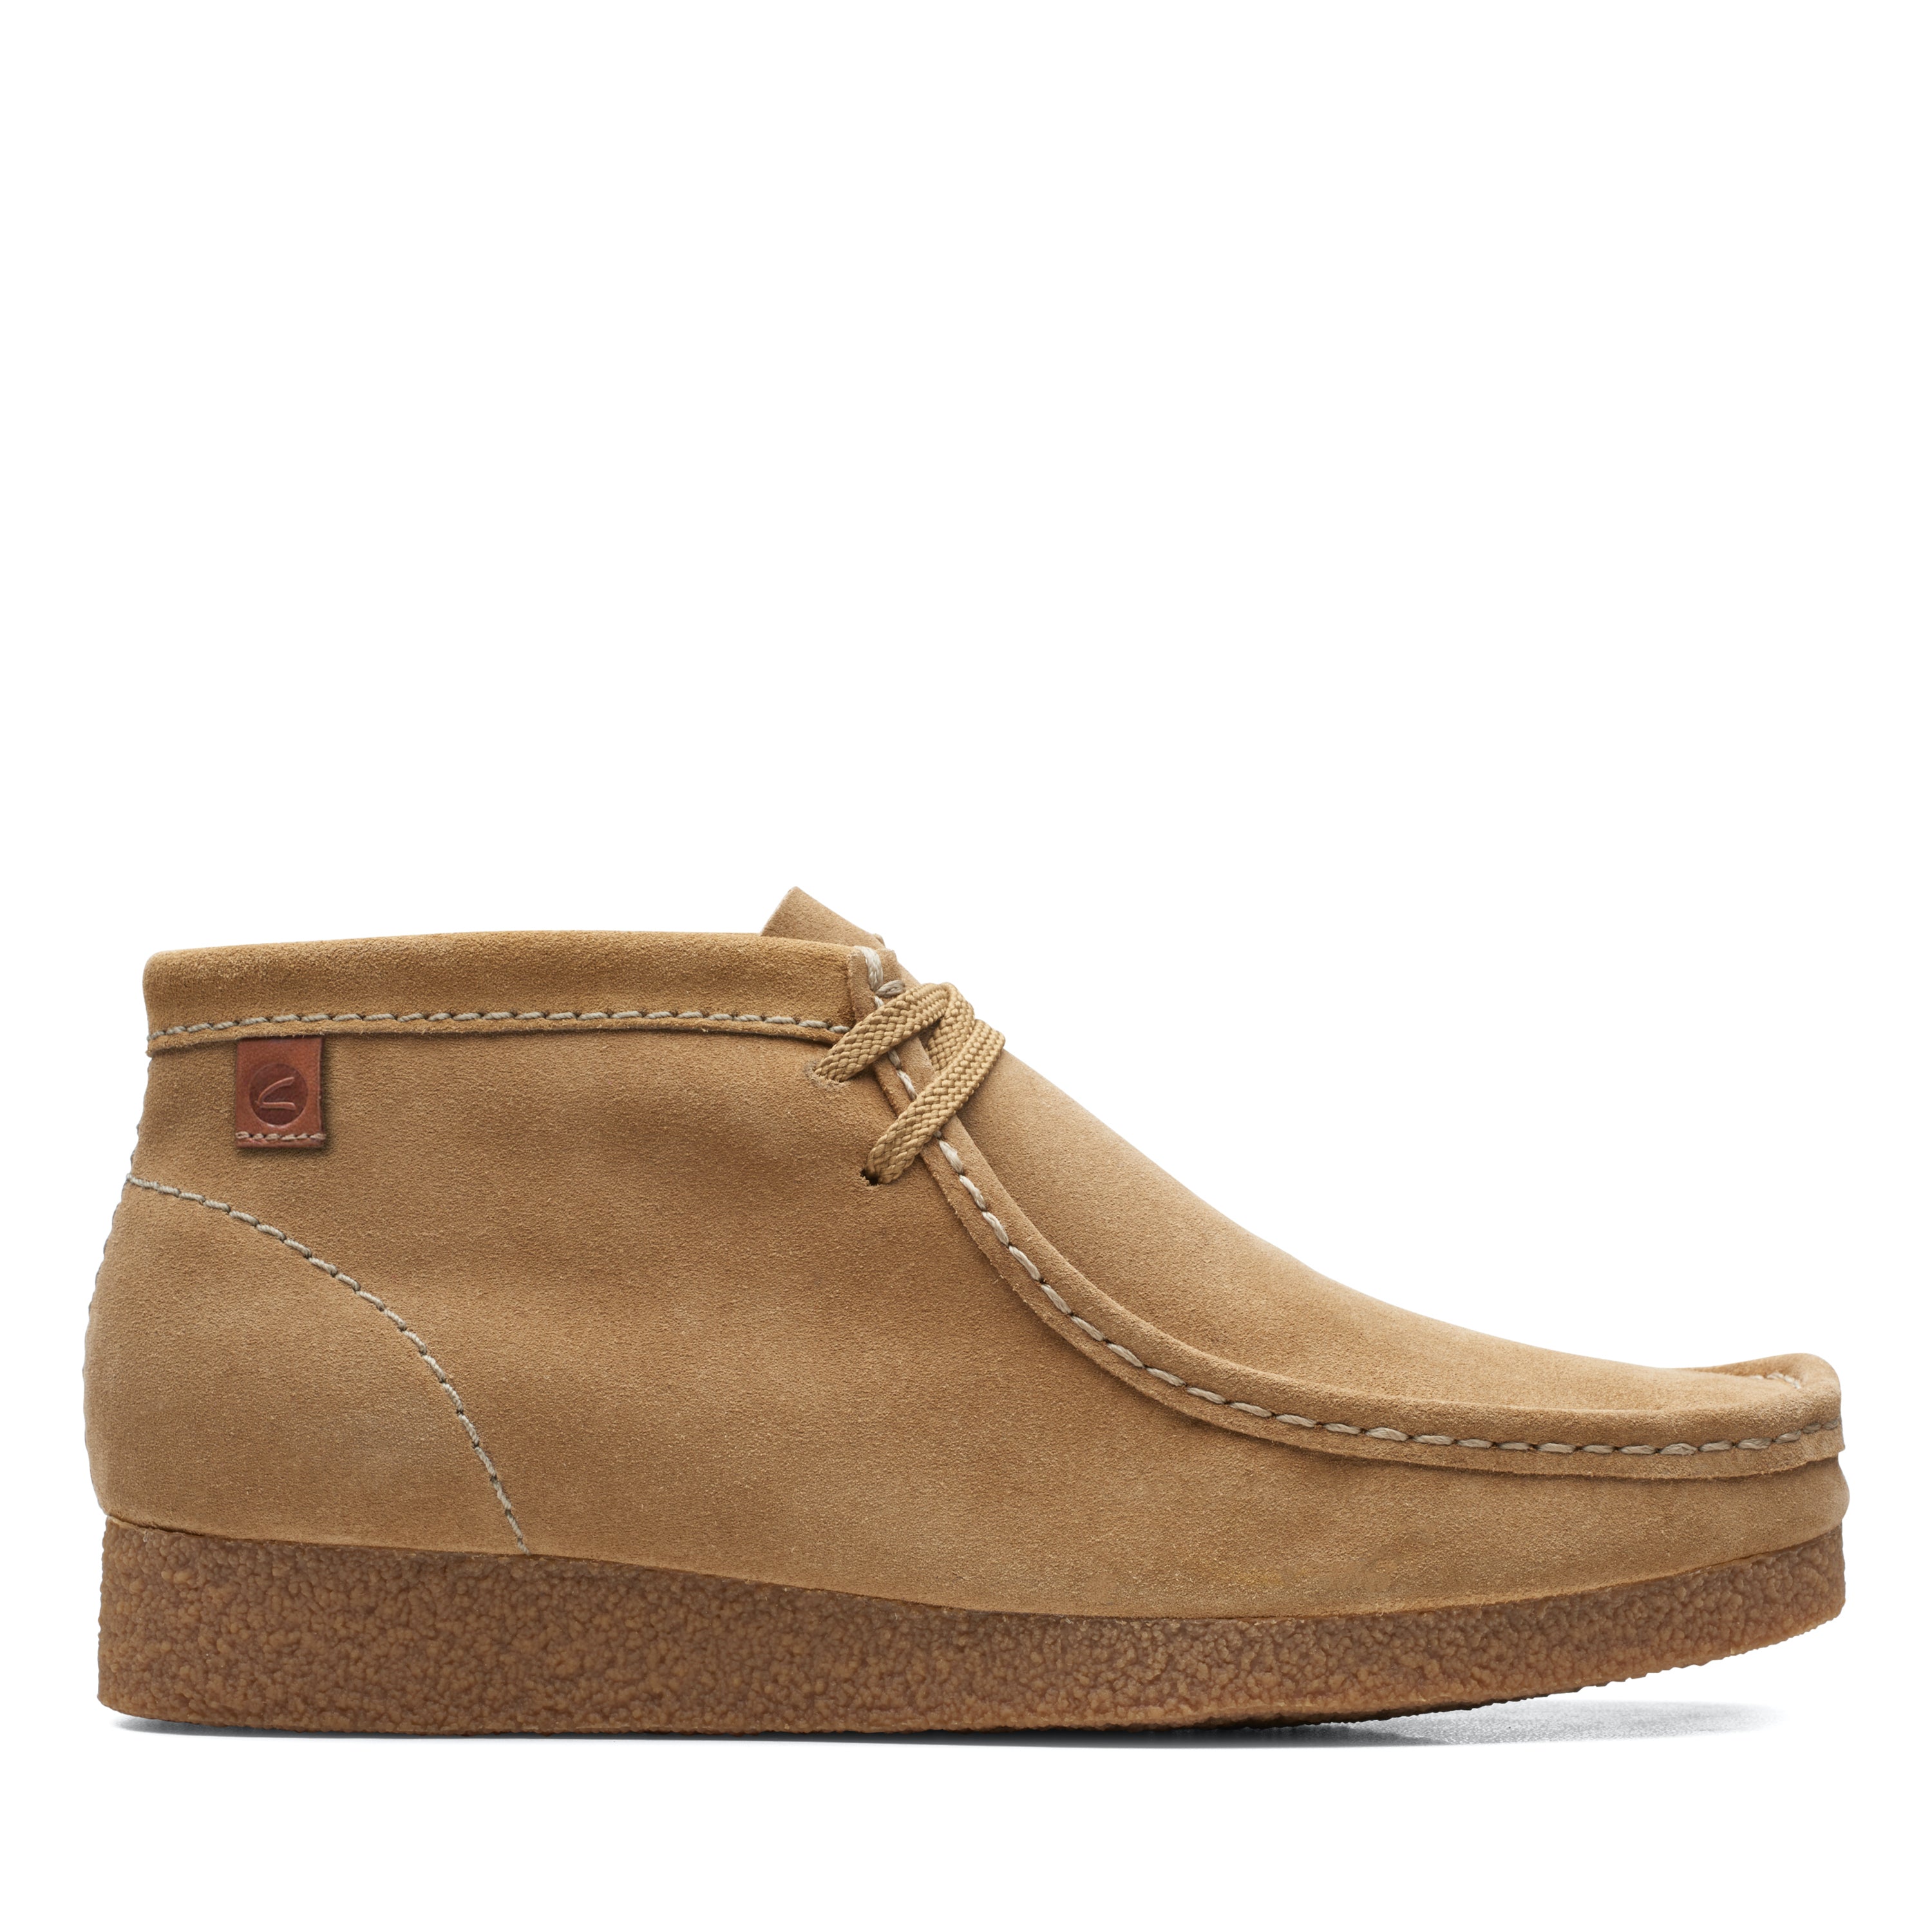 Clark’s Shoes - Shacre Boot - Dark Sand Suede